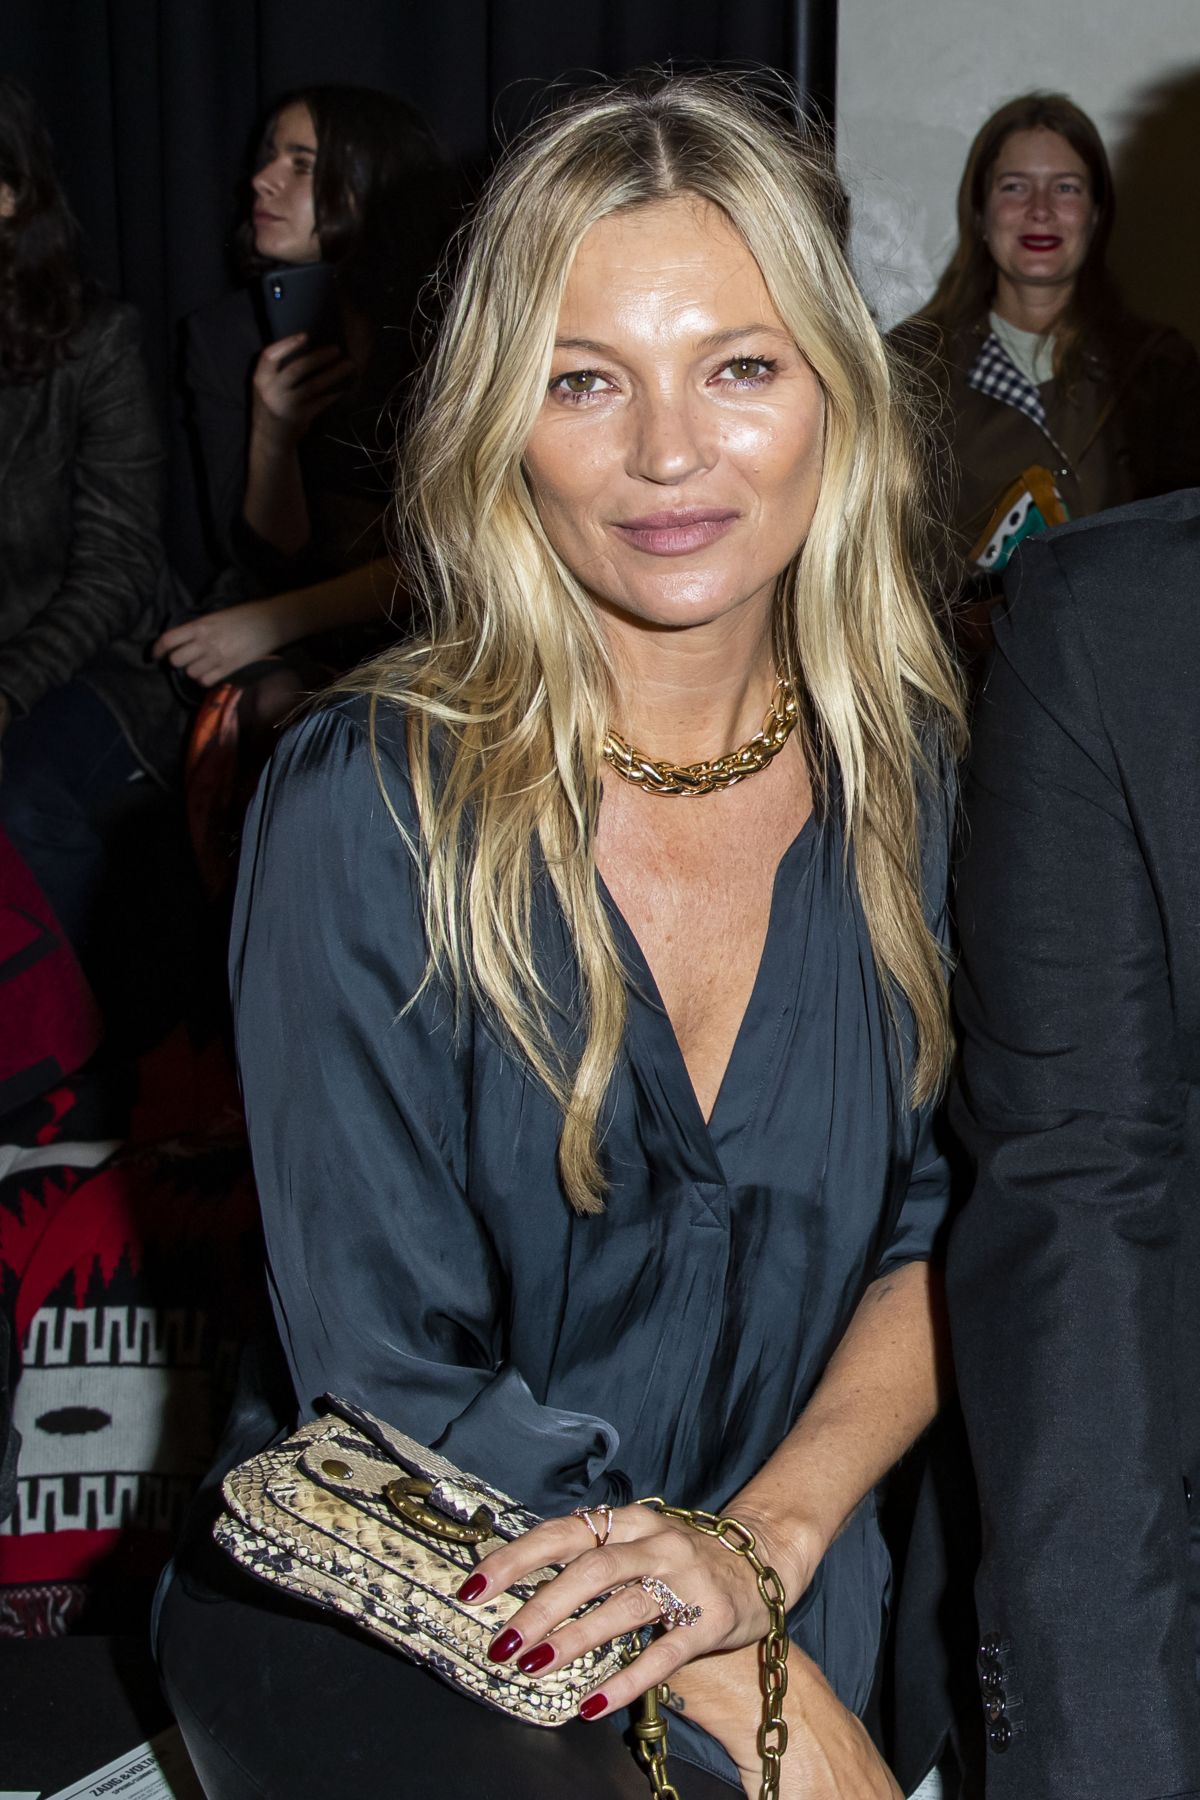 KATE MOSS at Zadig & Voltaire x Kate Moss x Lou Doillon Party at Paris ...